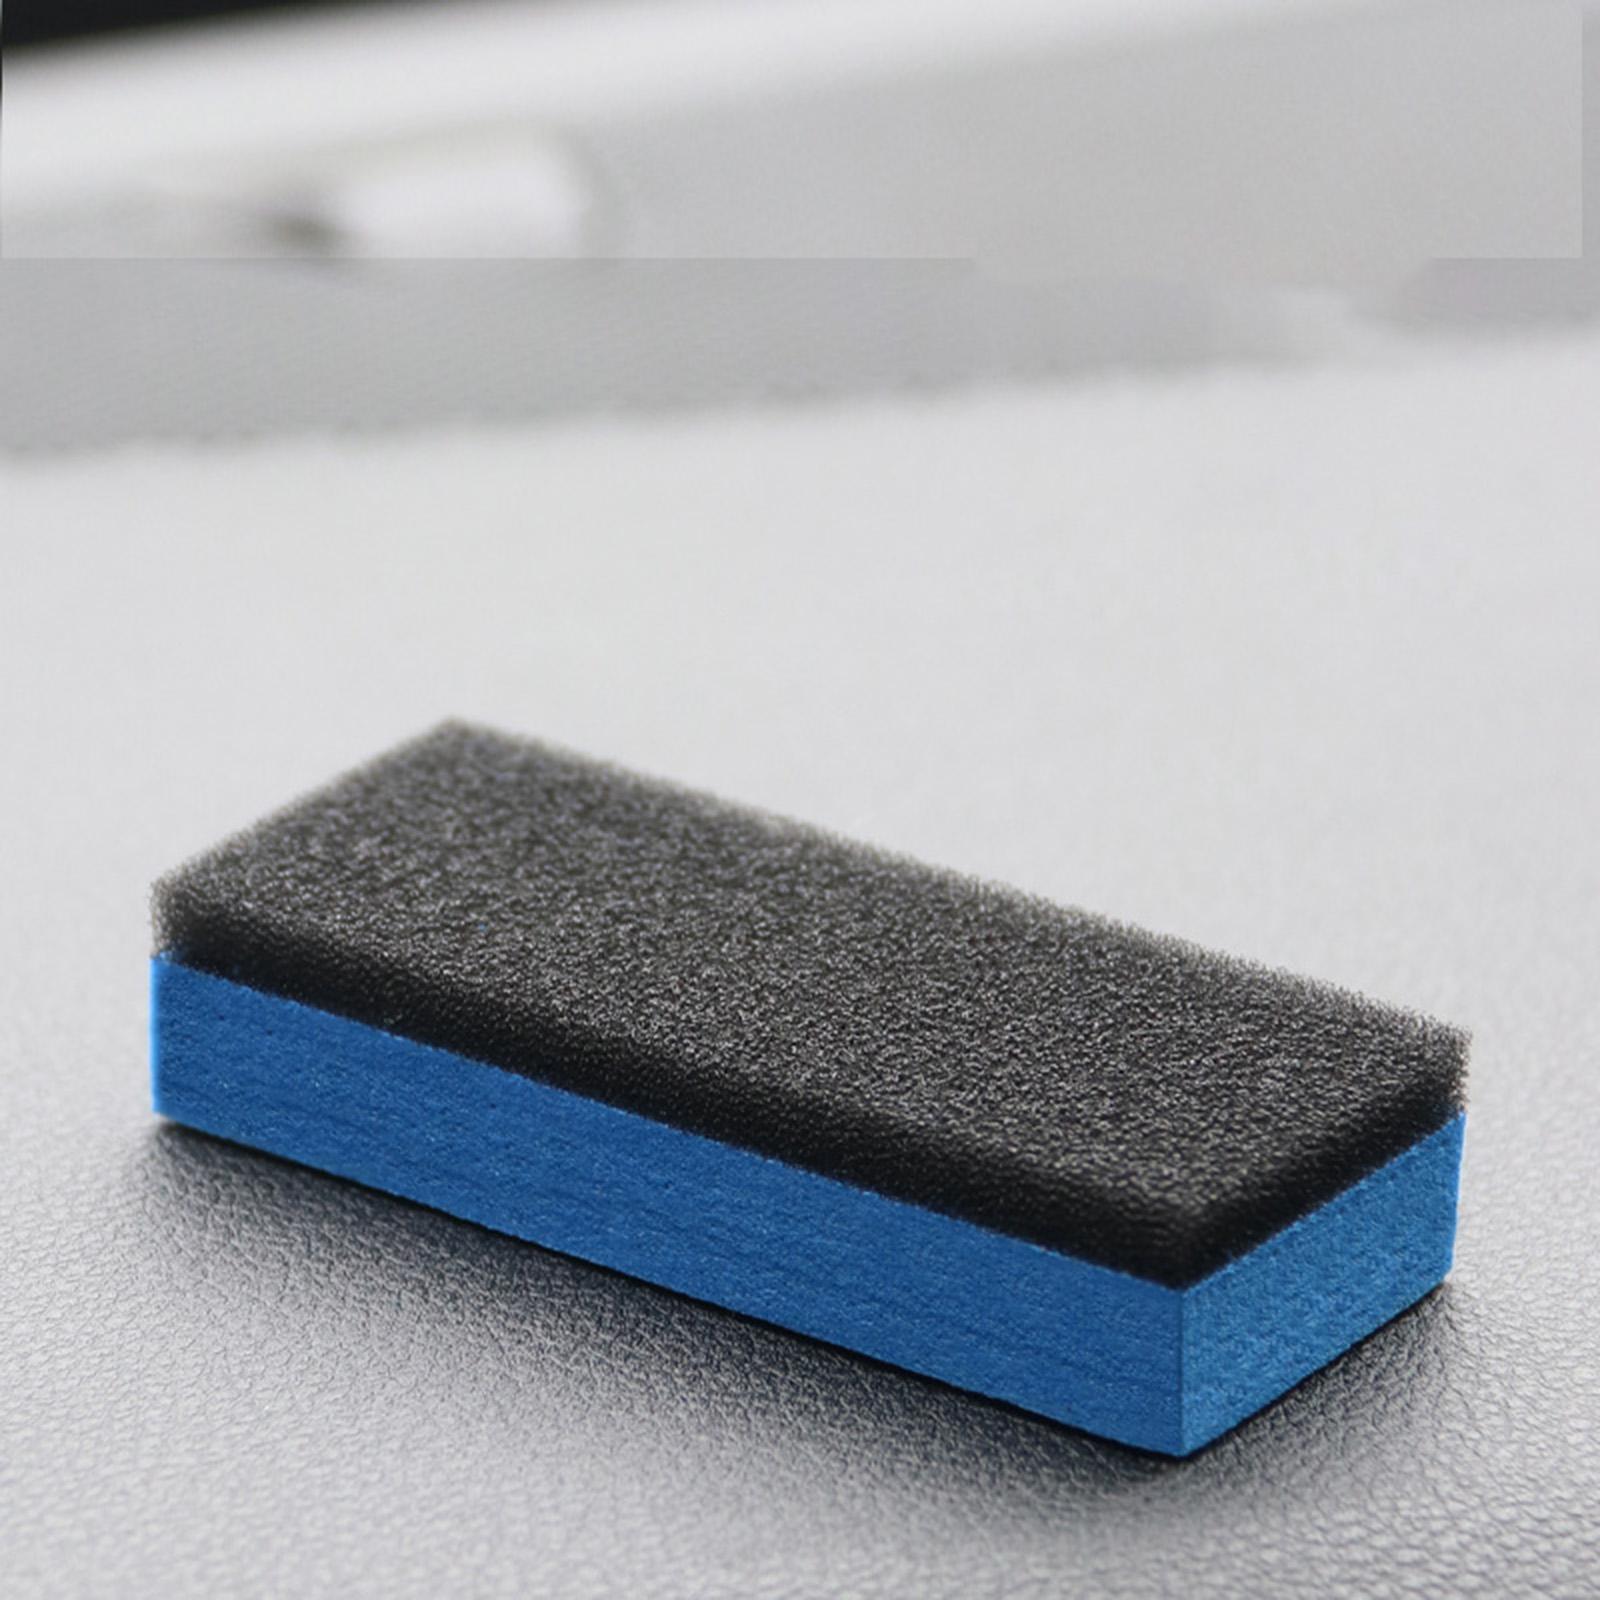 Sponge Applicator Pads Soft Cleaning Pad for Household Motorcycles